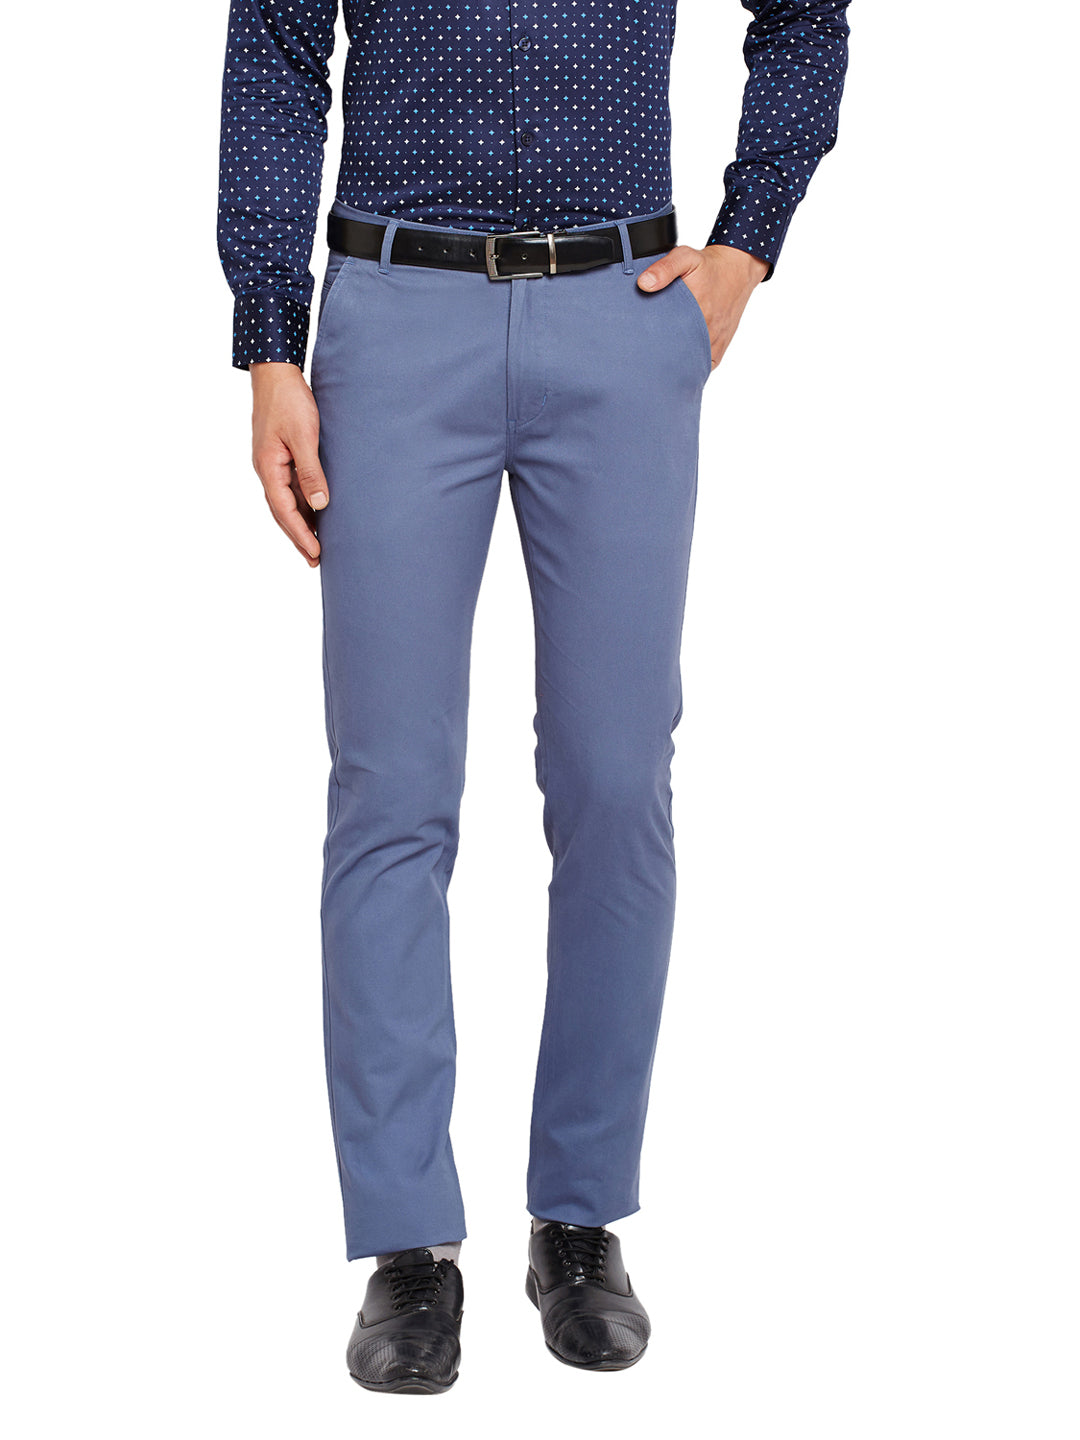 Men Blue Self Design Solid Stretchable Mid Rise Slim Fit Chinos Trouser